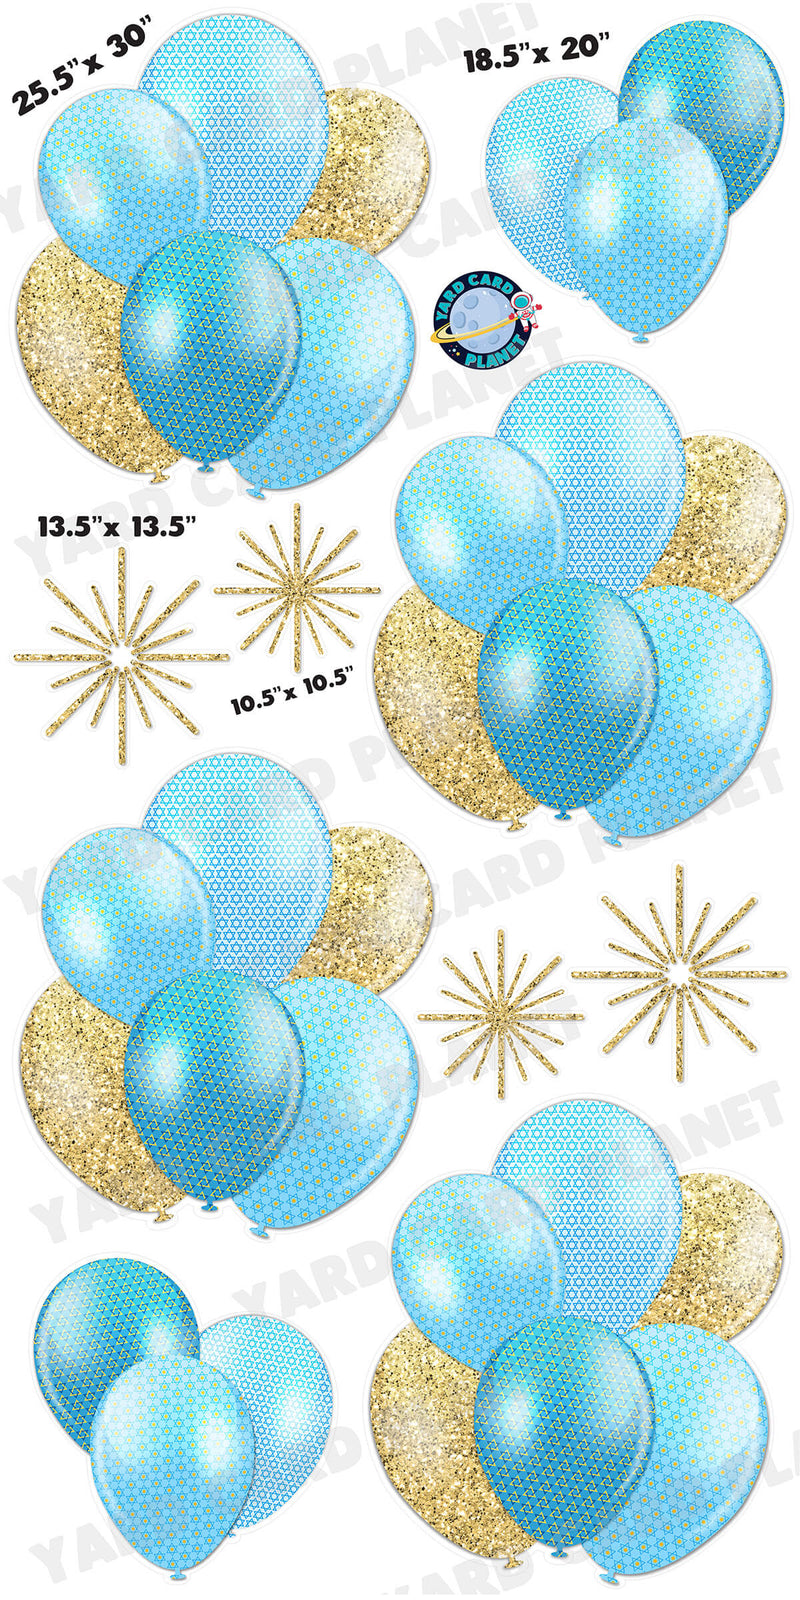 Gold Glitter Pattern Happy Hanukkah Stars of David Balloon Bouquets and Starbursts Yard Card Set with Measurements